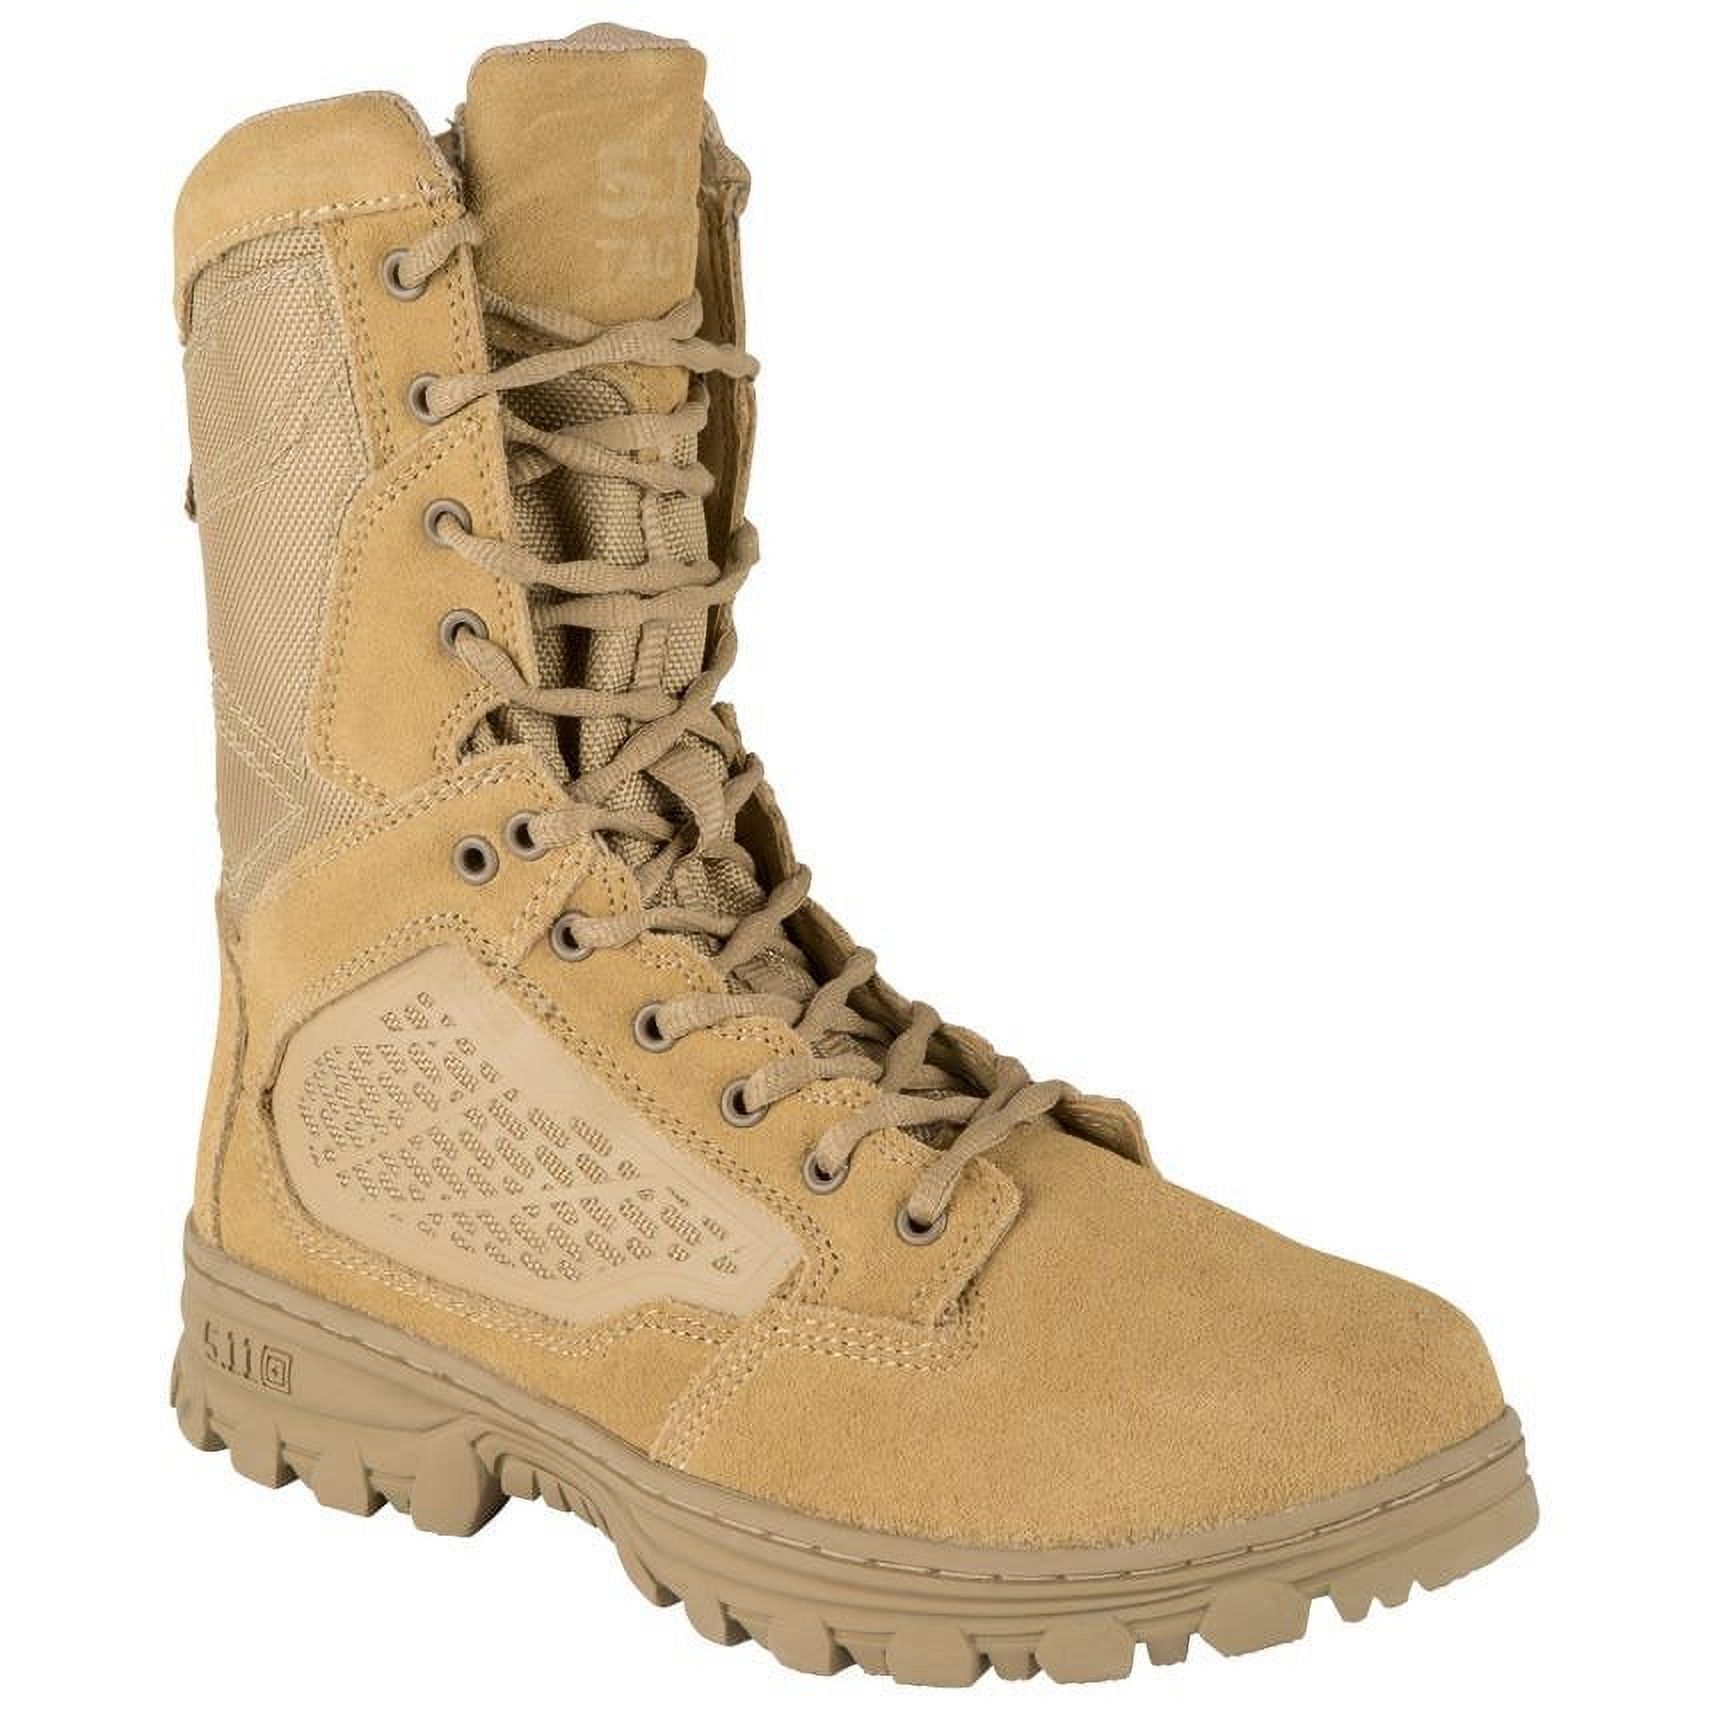 5.11 Work Gear EVO 8-Inch Waterproof Boots, Oil/Slip-Resistant, OrthoLite Insole, Coyote, 6/Regular, Style 12347 - image 1 of 4